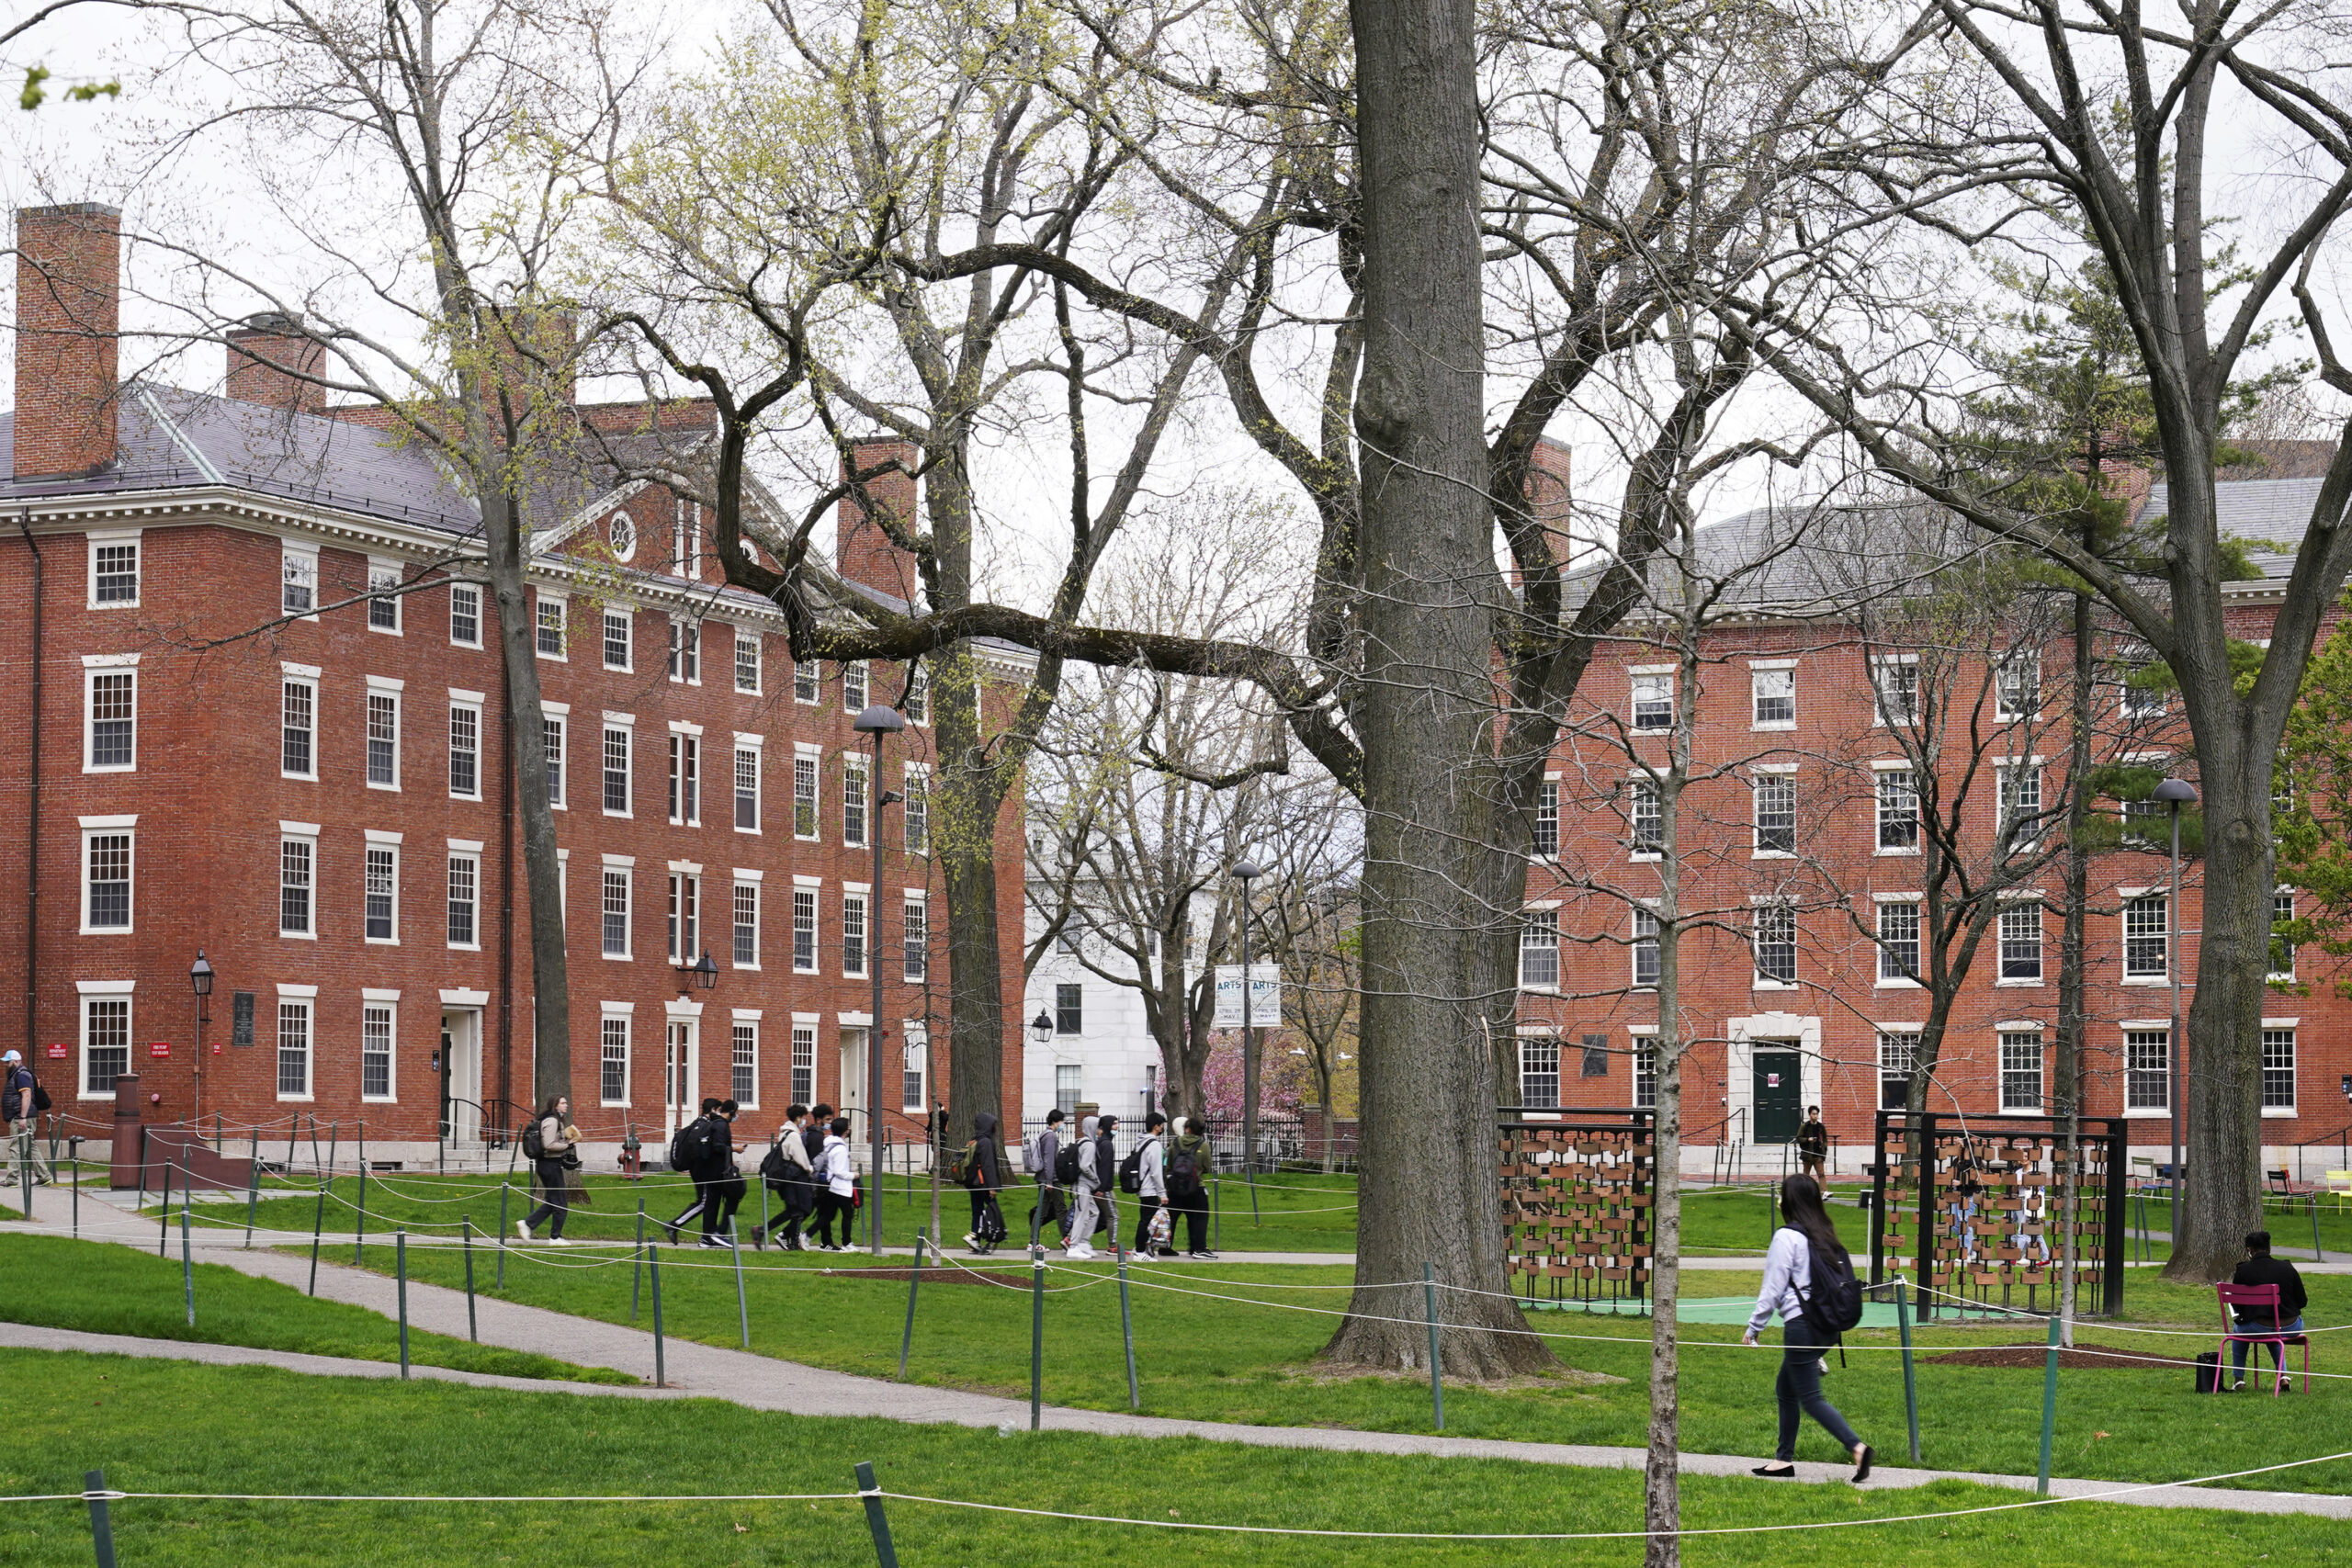 Harvard University is the nation’s worst school for free speech, scoring 0 points on a survey by the Foundation for Individual Rights and Expression (FIRE).